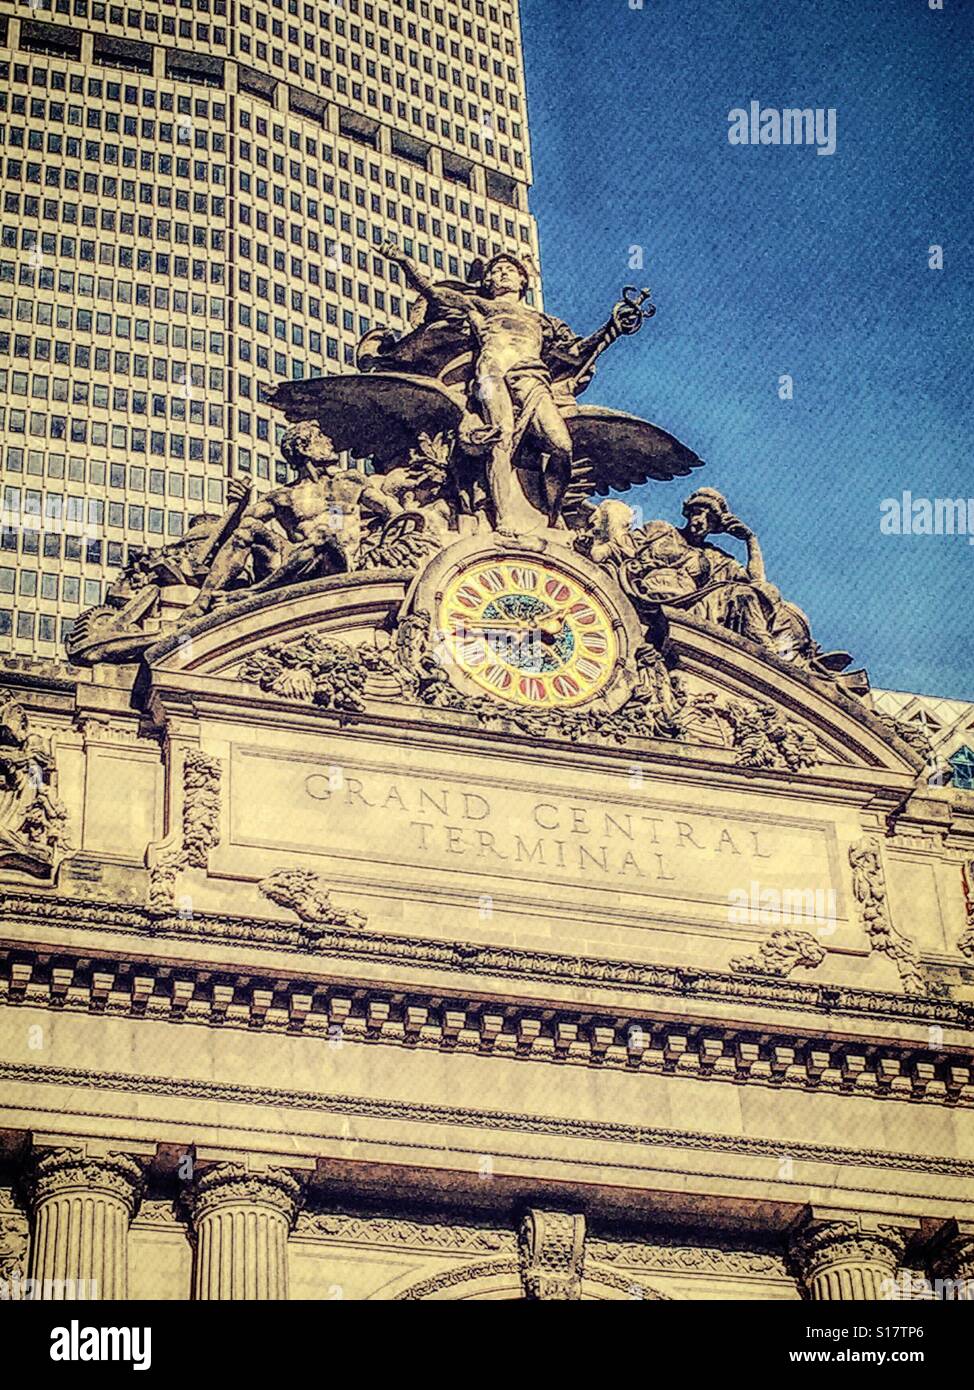 Mercury statue and clock at Grand Central Station, NYC, USA Stock Photo